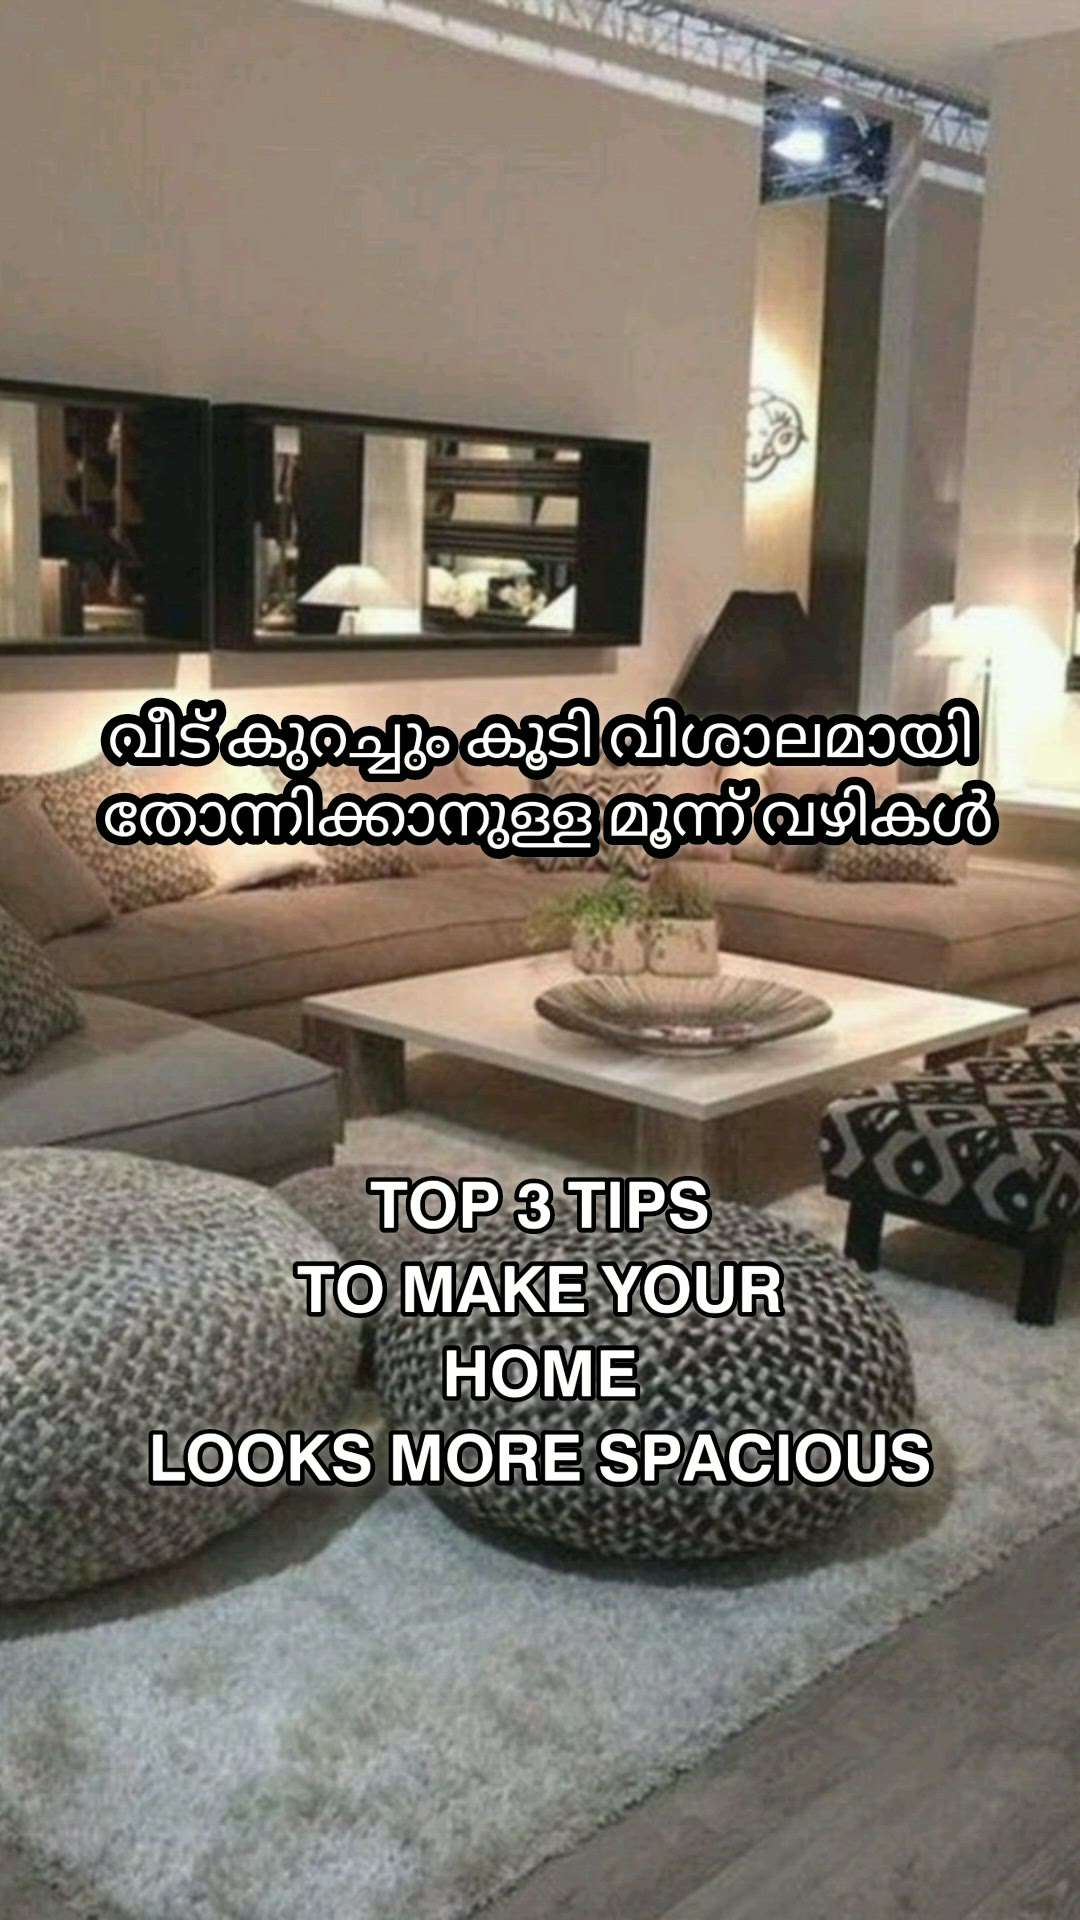 top 3 tips to make your home looks more spacious
 #creatorsofkolo #Kasargod  #top3tips #HomeDecor #ideasforyourhome